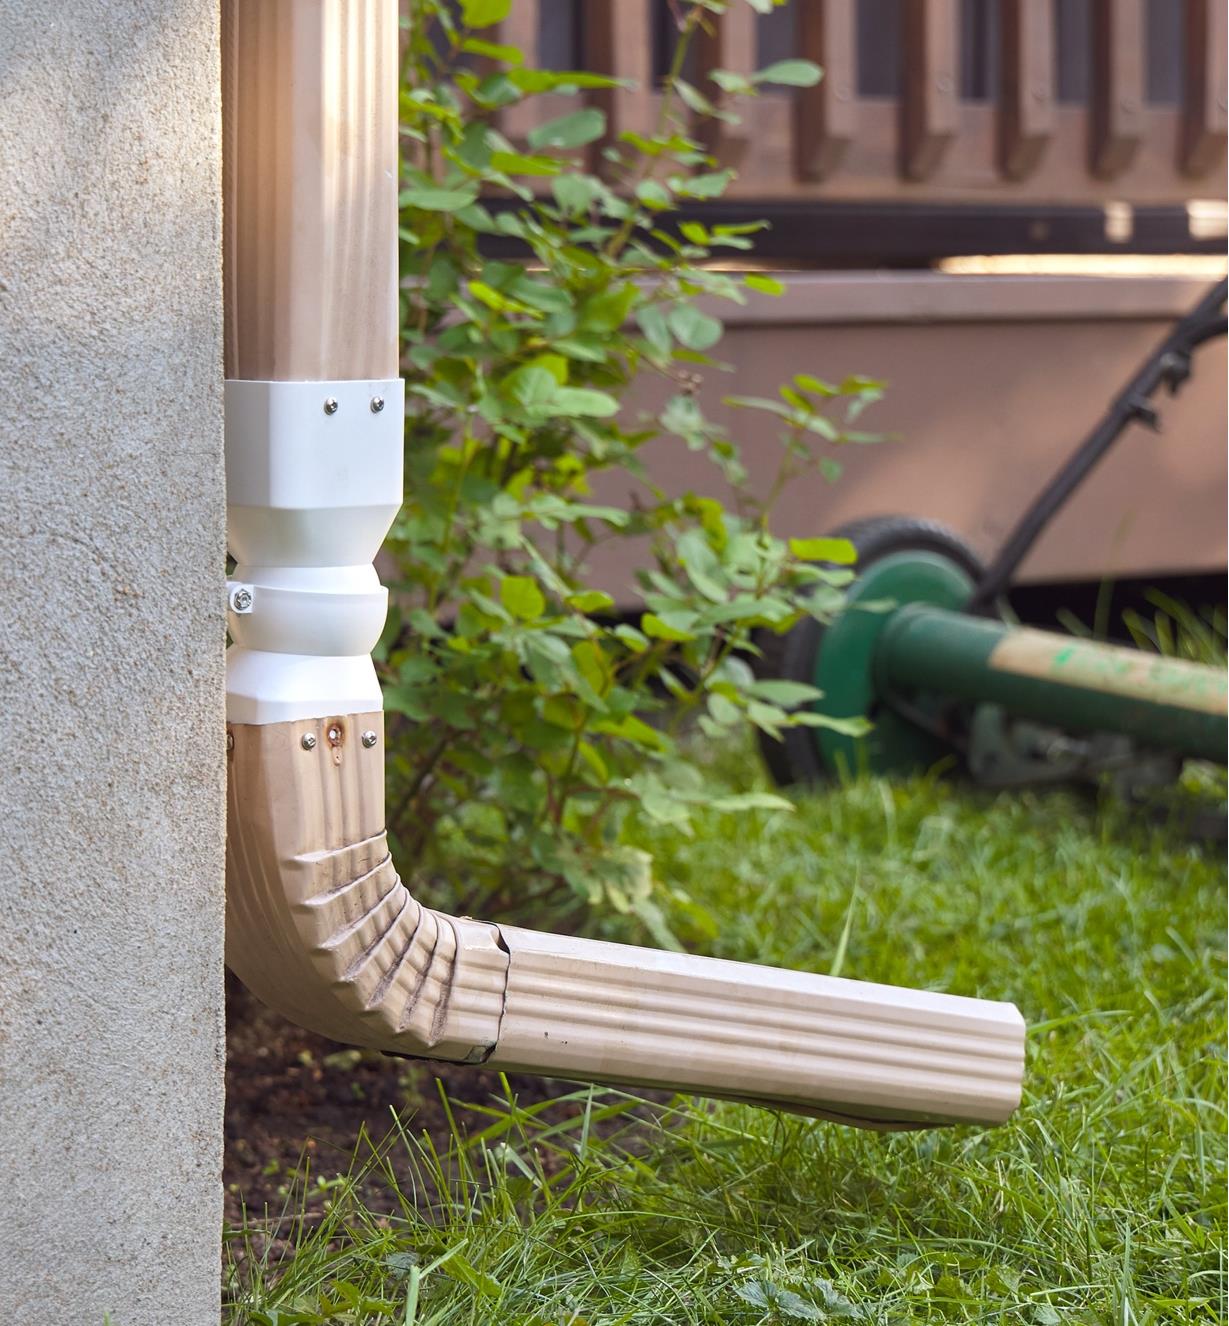 A TurnSpout connected with a downspout at the side of a house